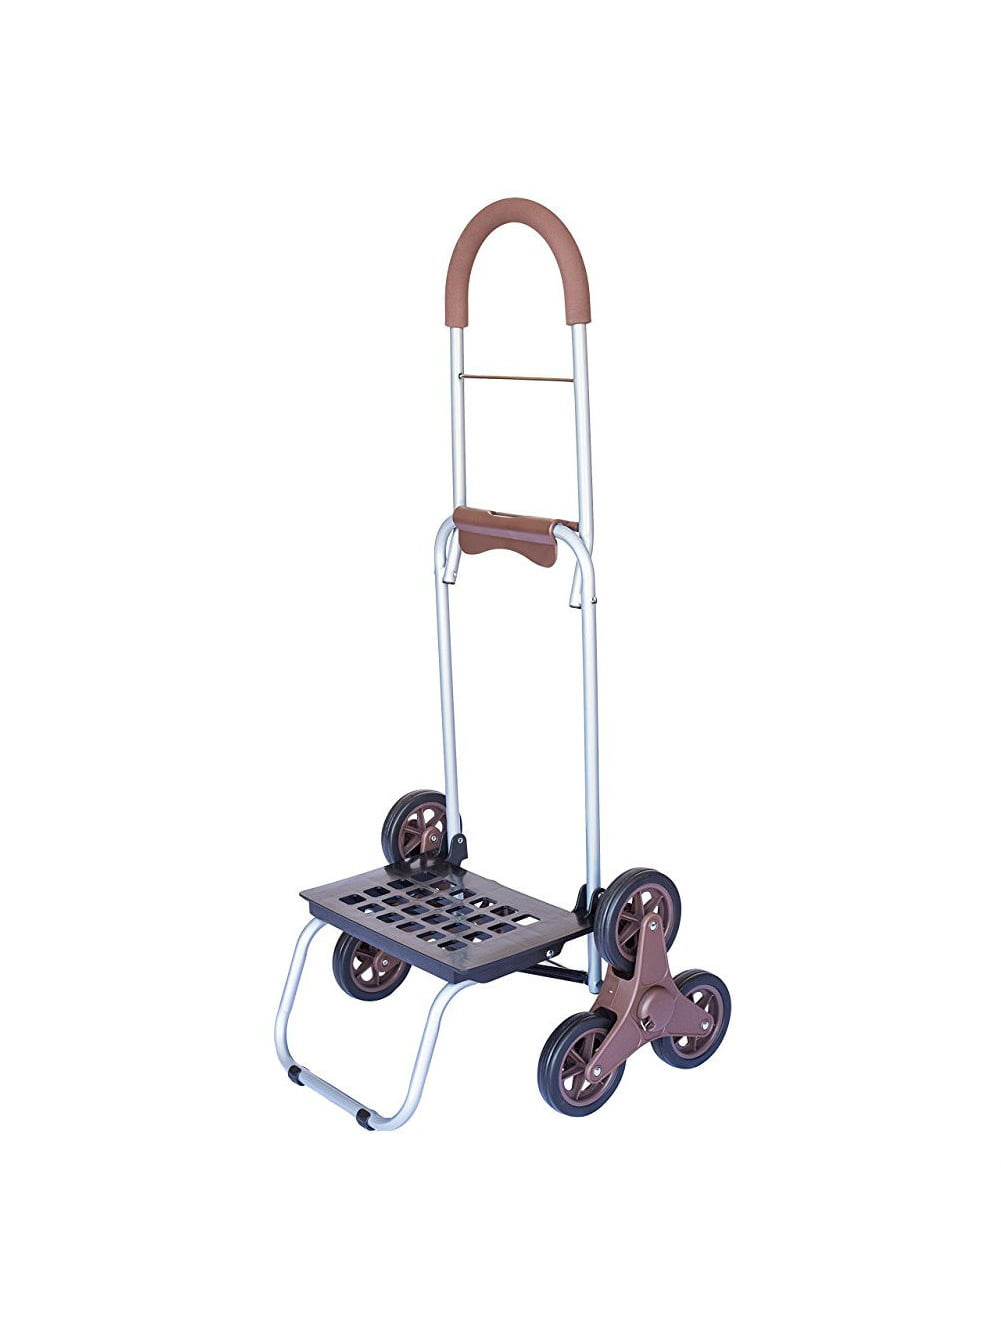 dbest products Mighty Max Personal Dolly Red Handtruck Cart Hardware Garden Utilty 